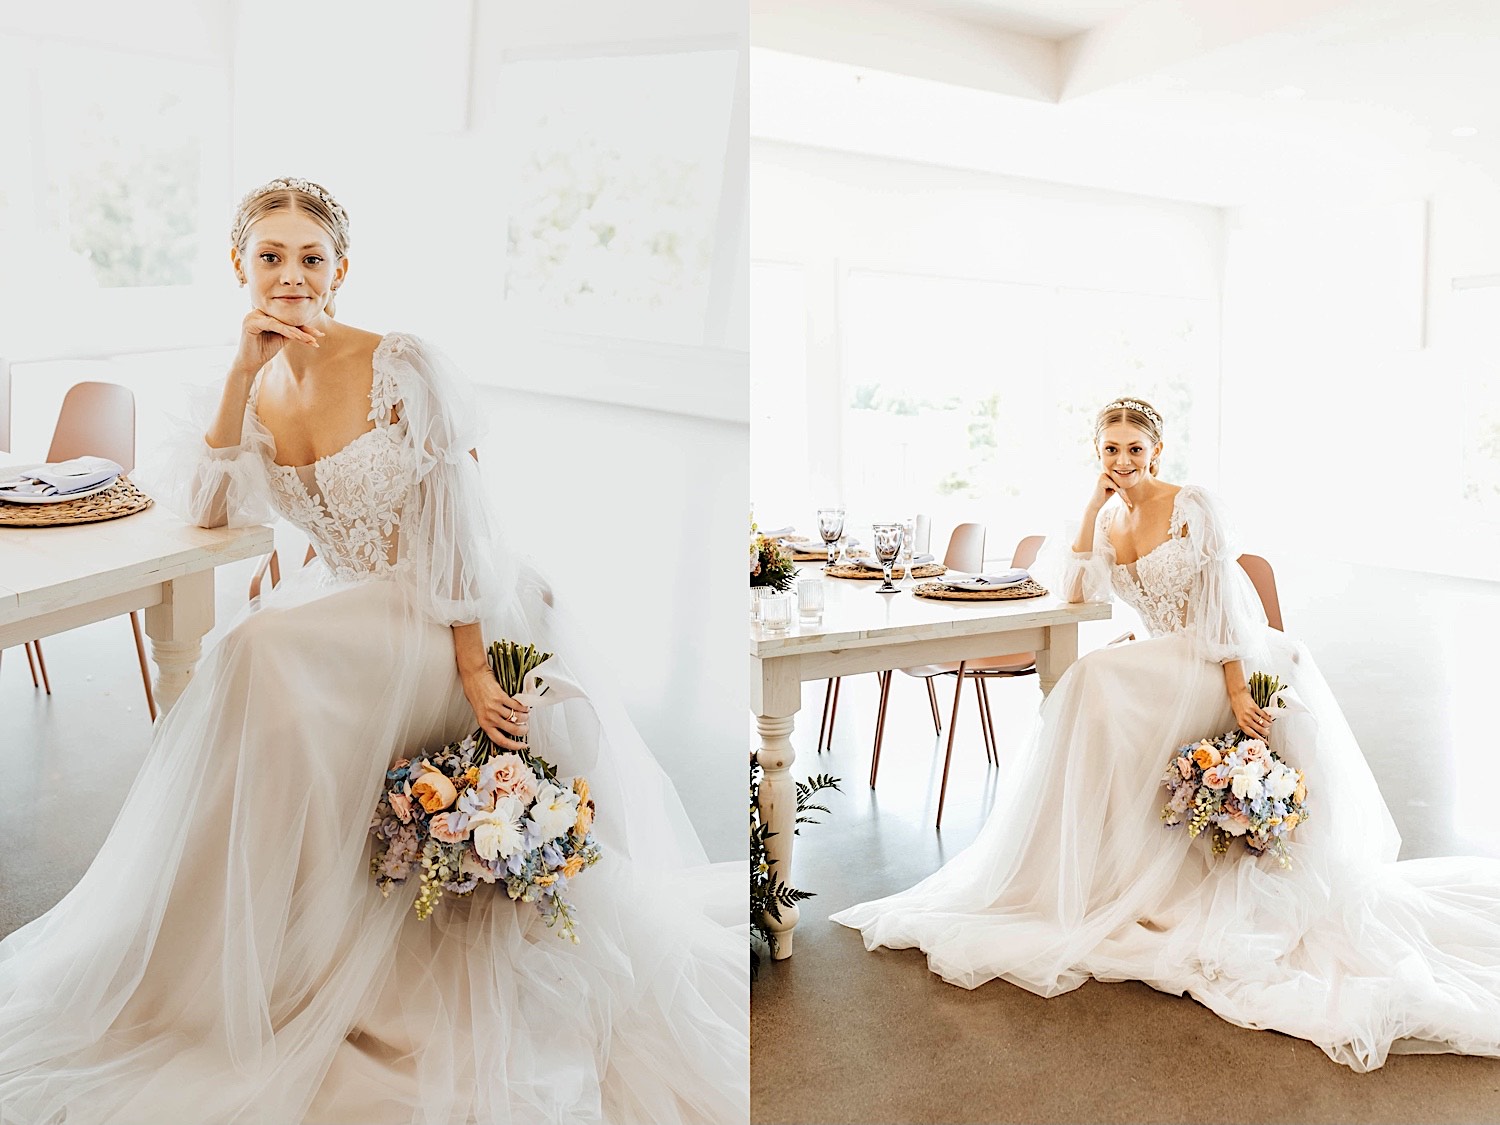 2 photos side by side, the left is of a bride sitting at a table and looking at the camera while holding her bouquet, the right is a similar photo but the bride is smiling at the camera